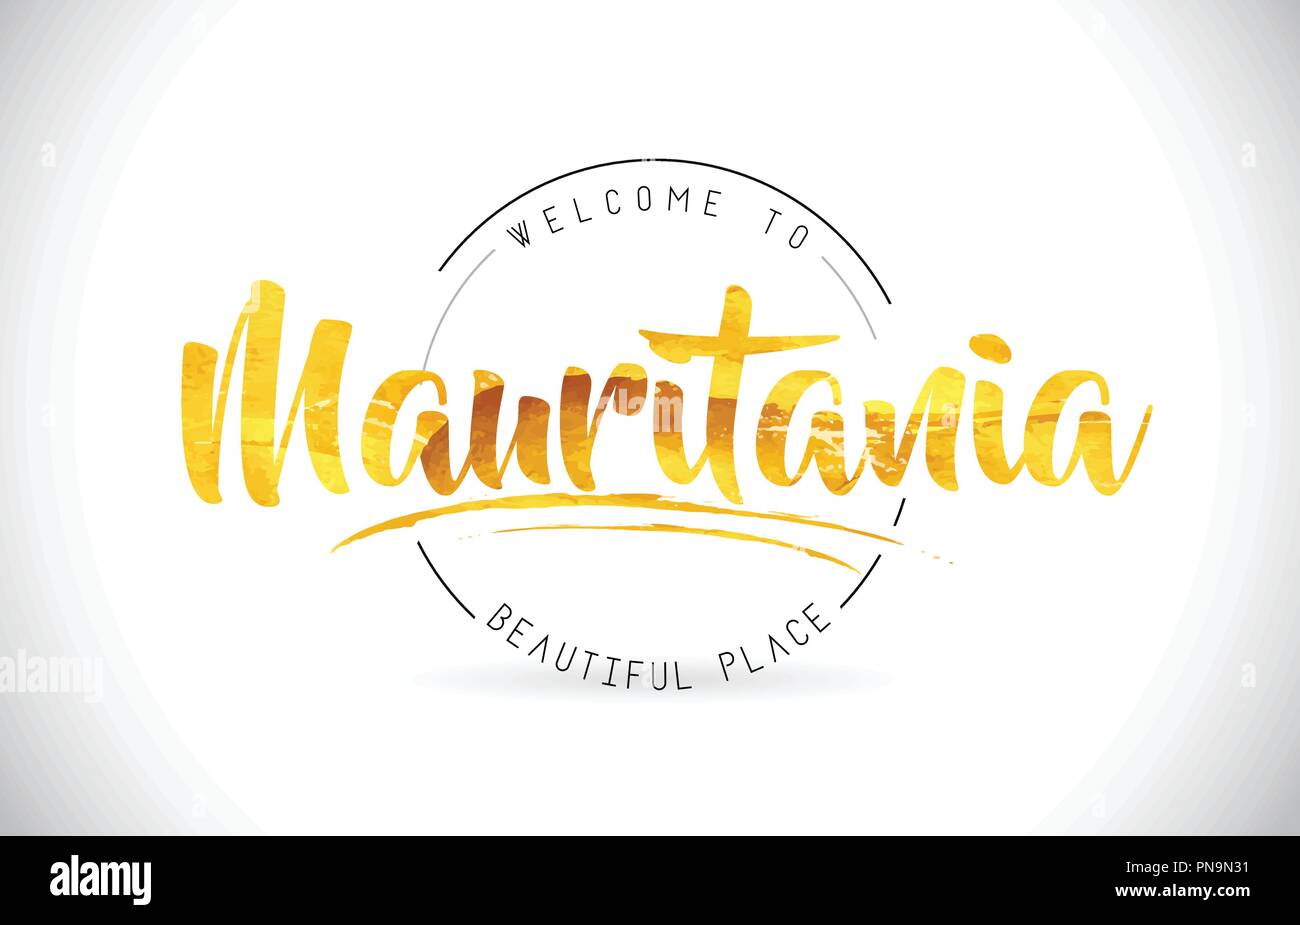 Mauritania Welcome To Word Text with Handwritten Font and Golden Texture Design Illustration Vector. Stock Vector